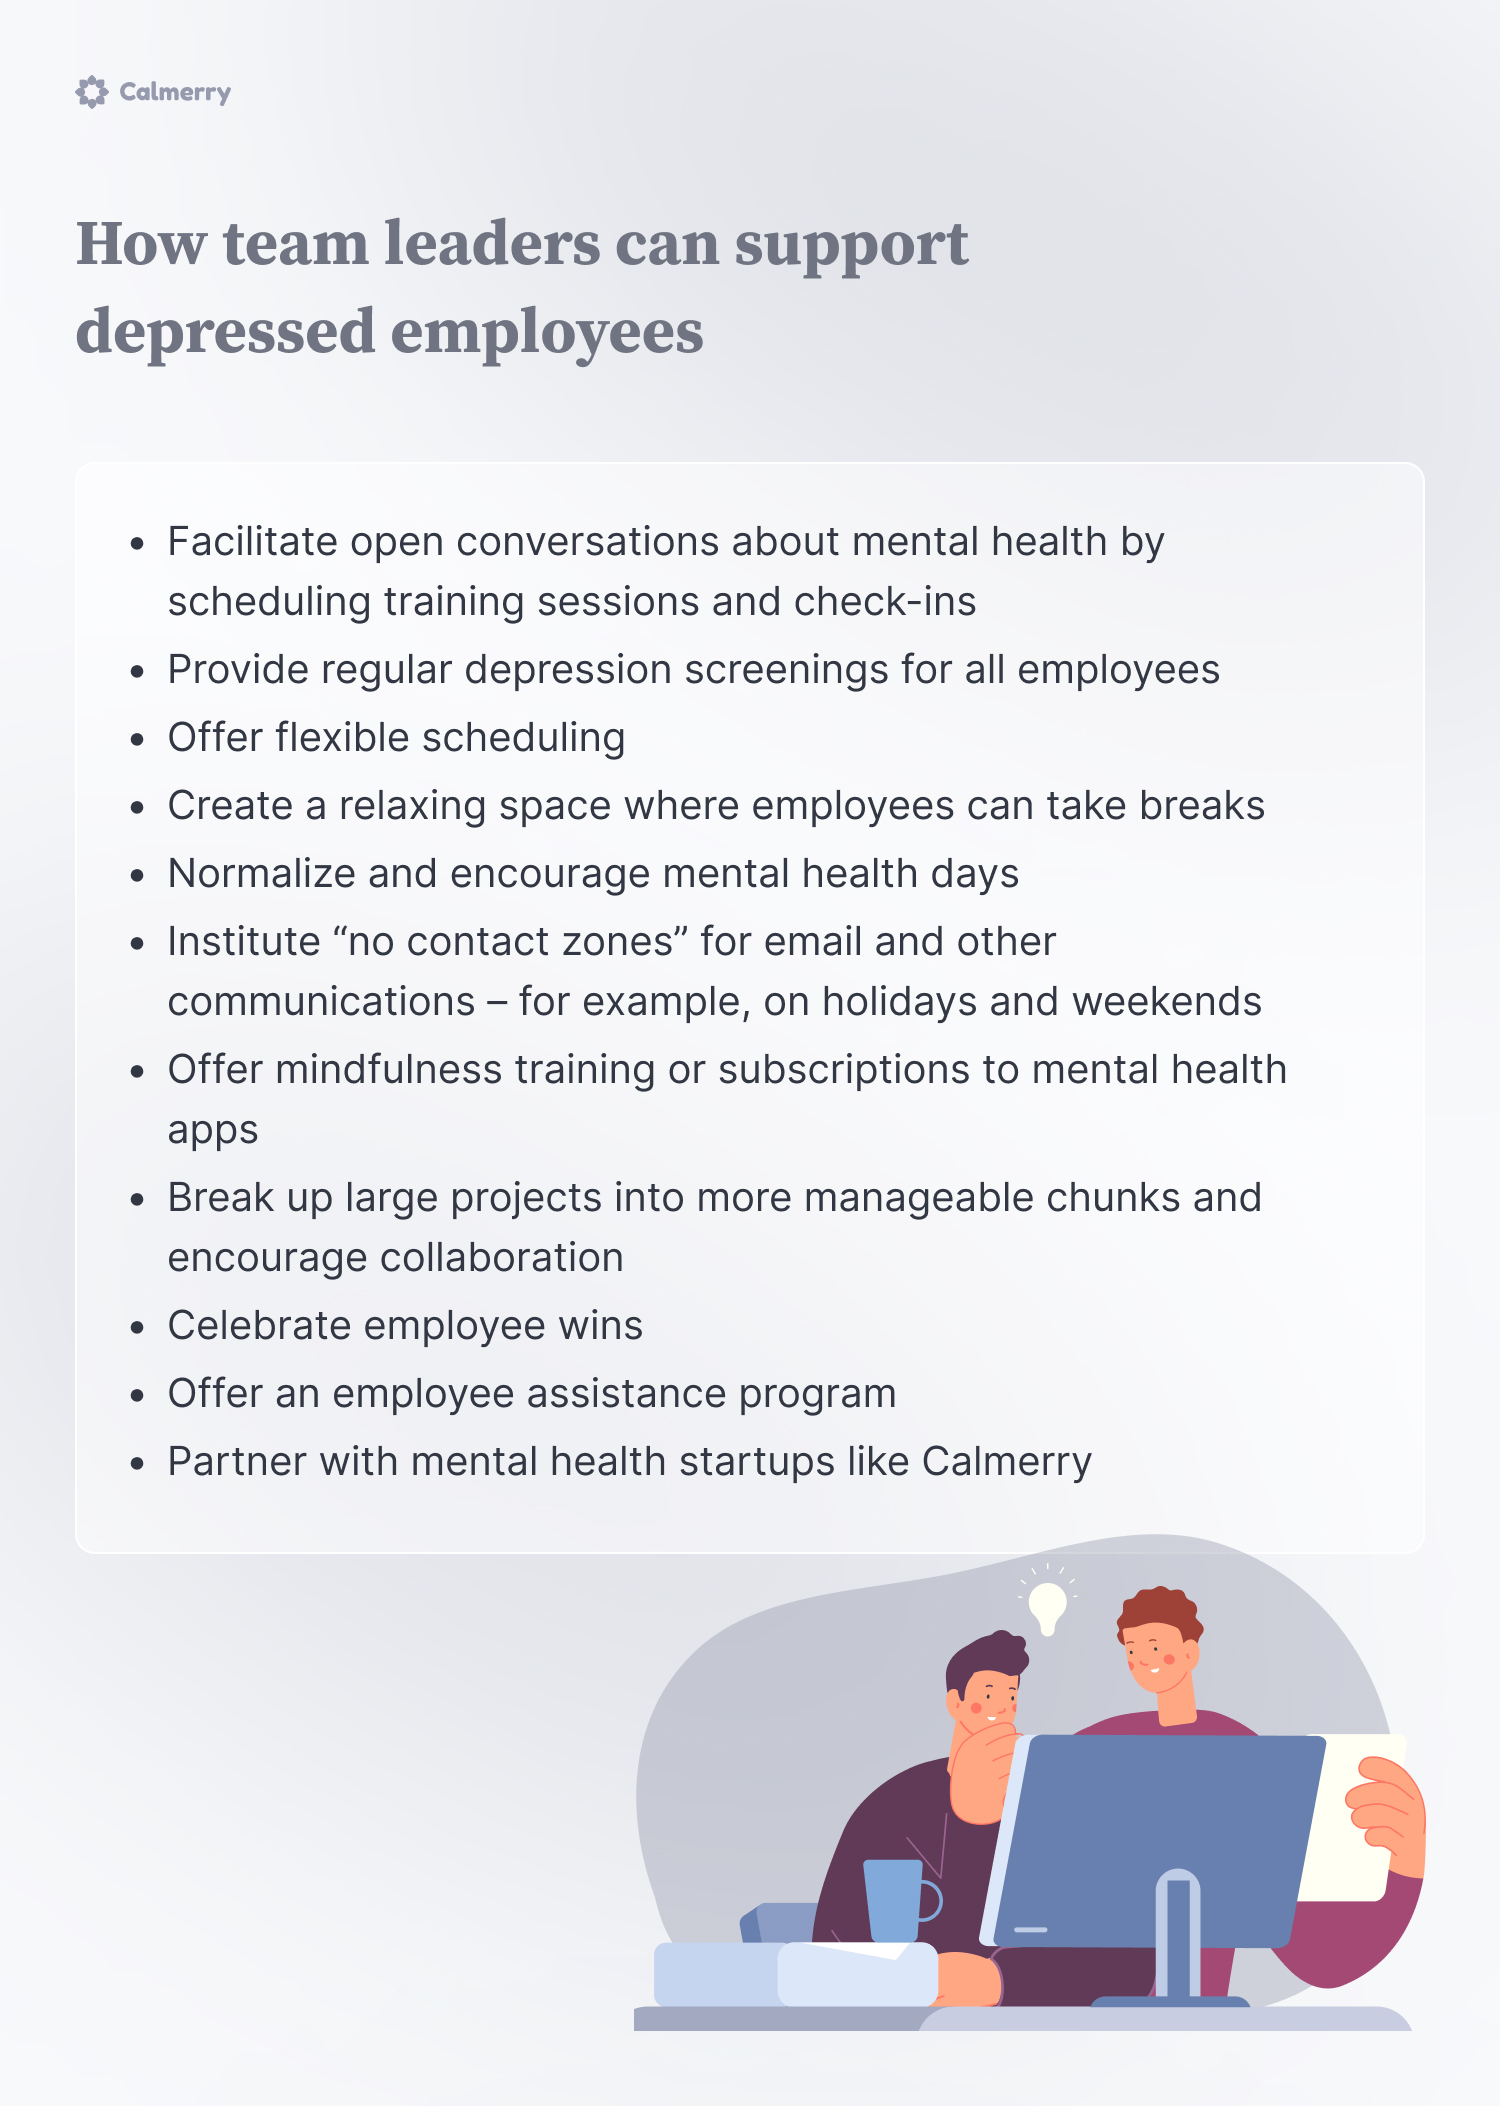 How team leaders can support depressed employees
Facilitate open conversations about mental health by scheduling training sessions and check-ins
Provide regular depression screenings for all employees
Offer flexible scheduling
Create a relaxing space where employees can take breaks
Normalize and encourage mental health days
Institute “no contact zones” for email and other communications – for example, on holidays and weekends
Offer mindfulness training or subscriptions to mental health apps
Break up large projects into more manageable chunks and encourage collaboration
Celebrate employee wins
Offer an employee assistance program
Partner with mental health startups like Calmerry